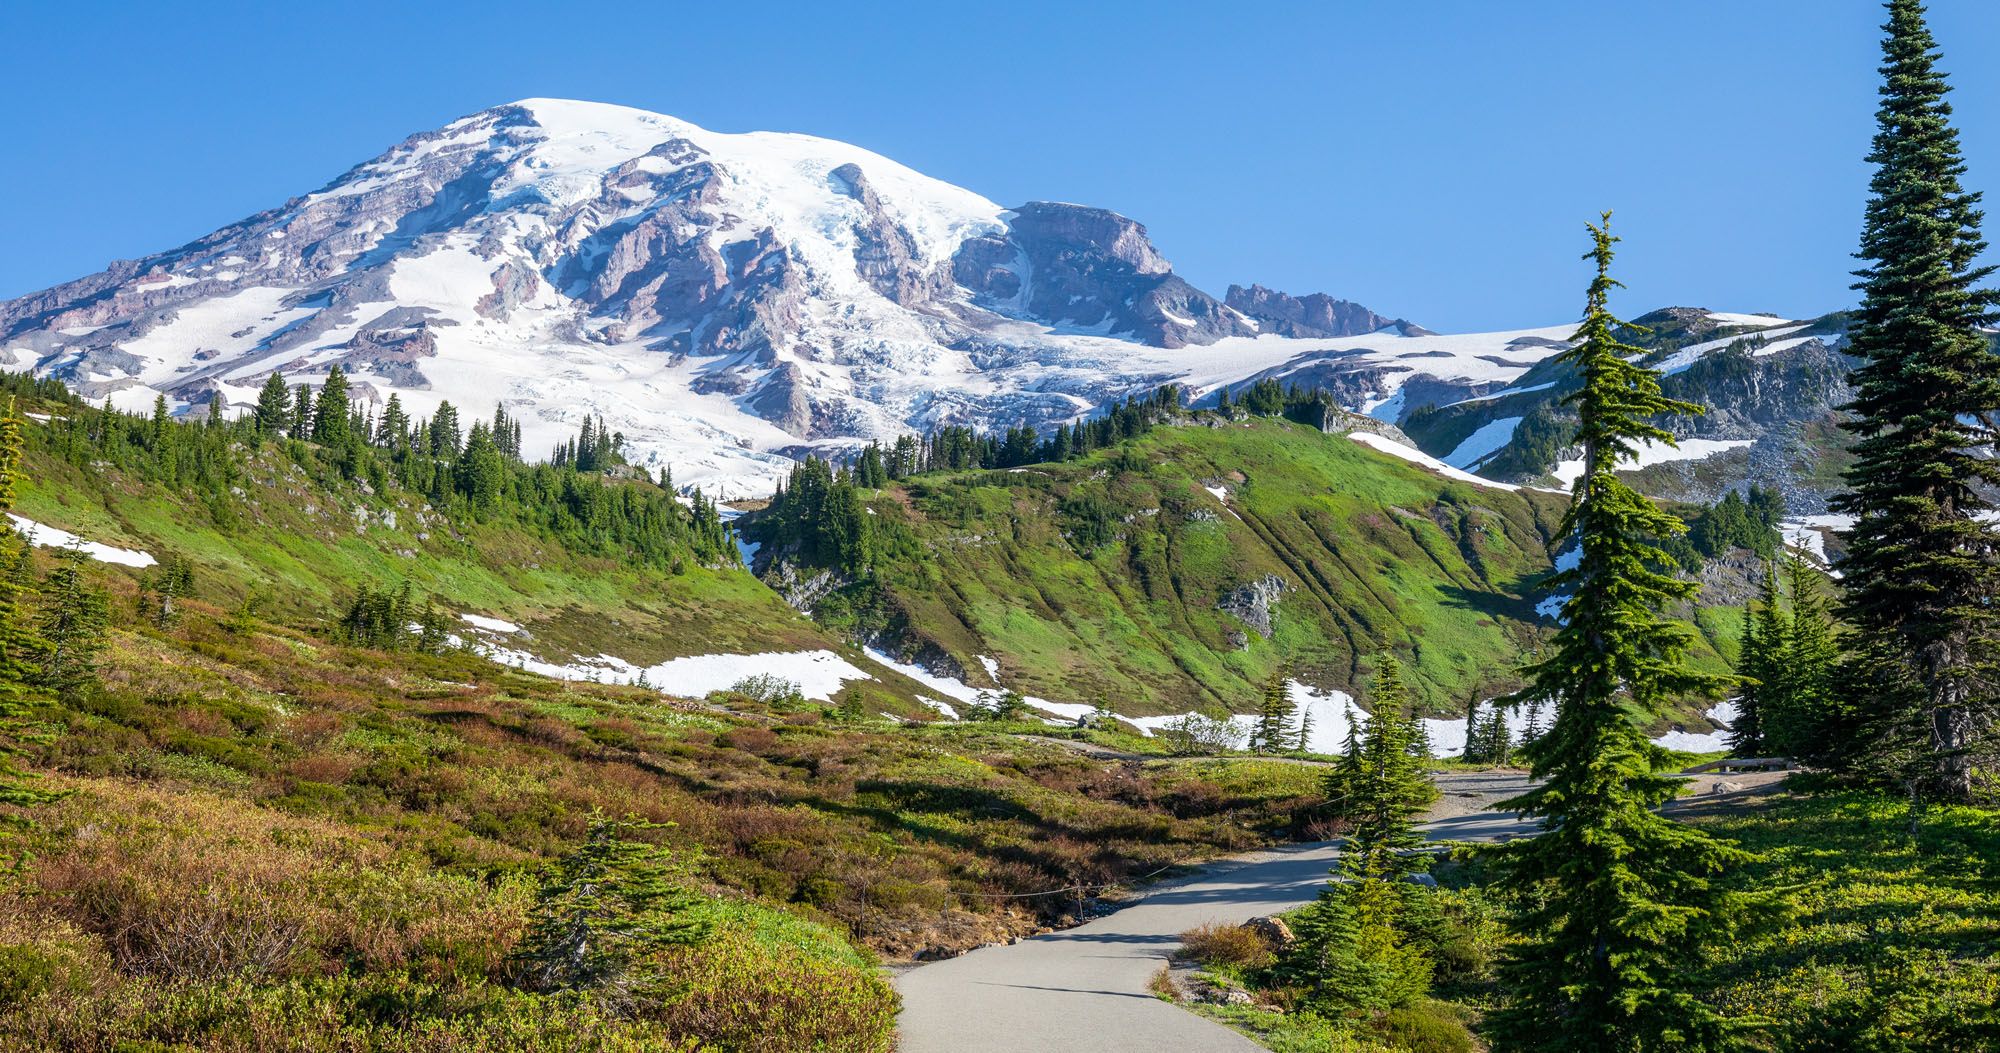 Featured image for “Skyline Trail Loop & Panorama Point, Mount Rainier National Park”